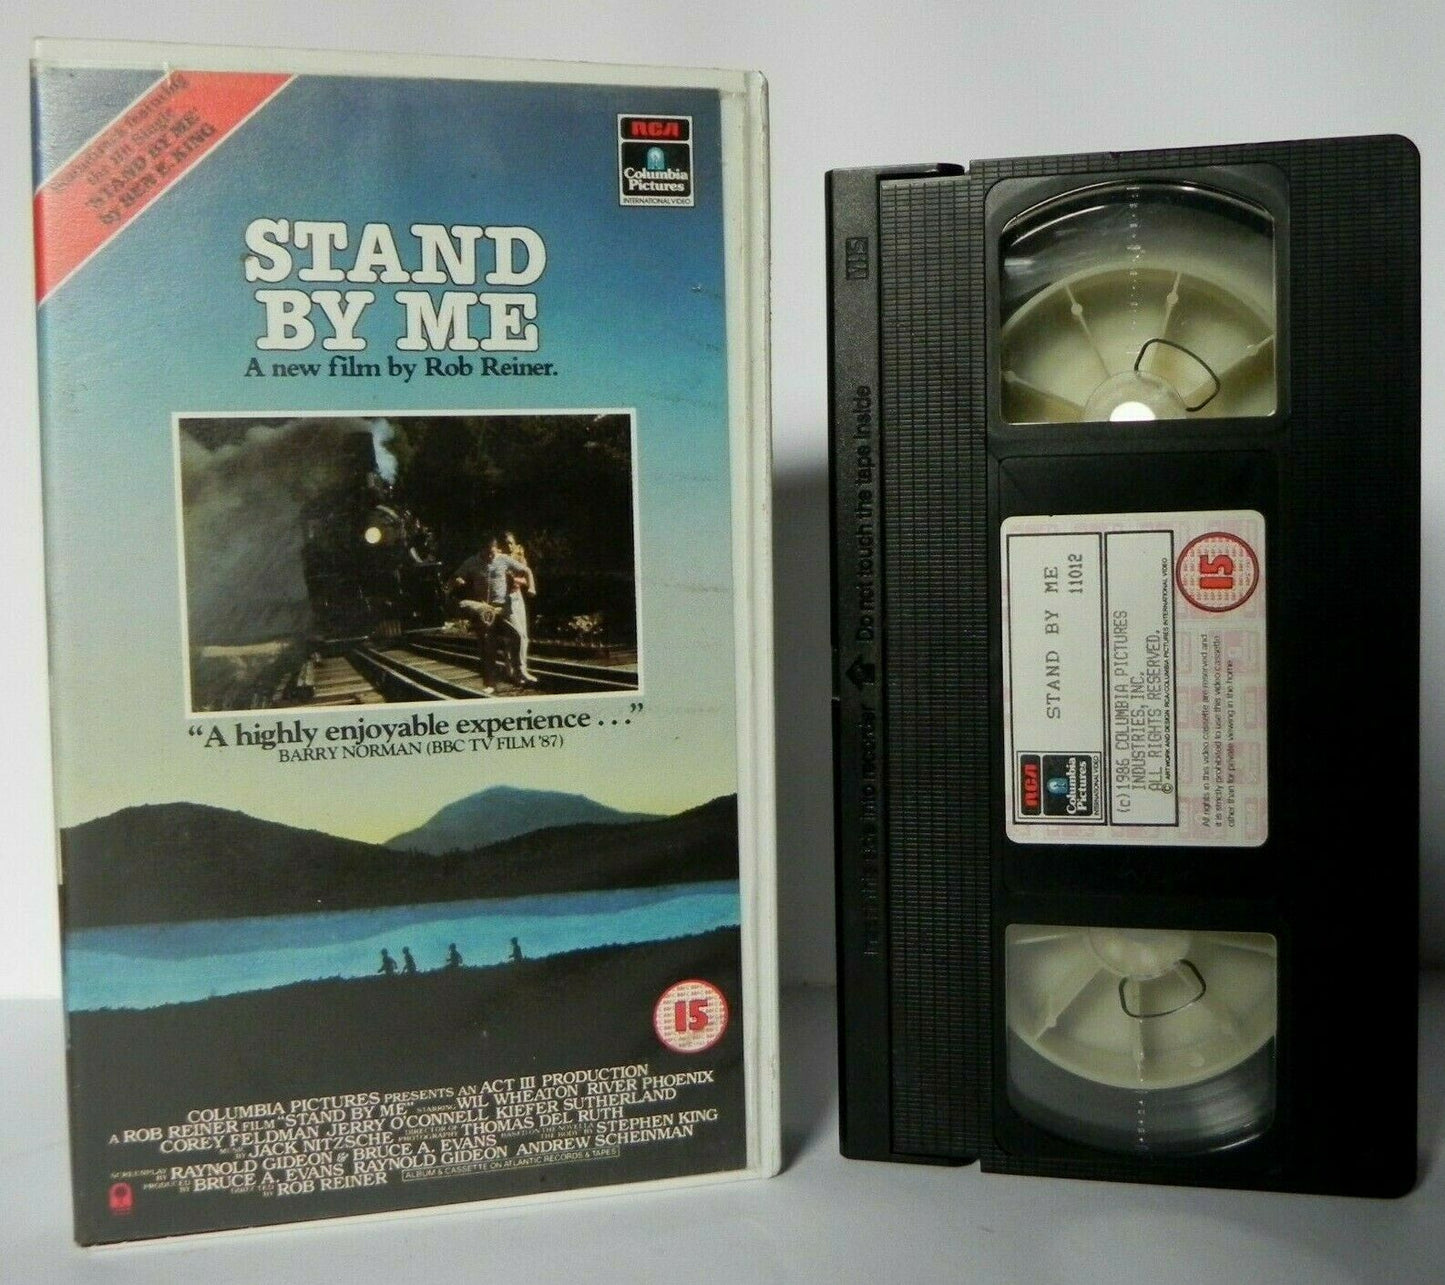 Stand By Me: Rivier Phoenix (1986) - Based On "The Body" - Stephen King - VHS-